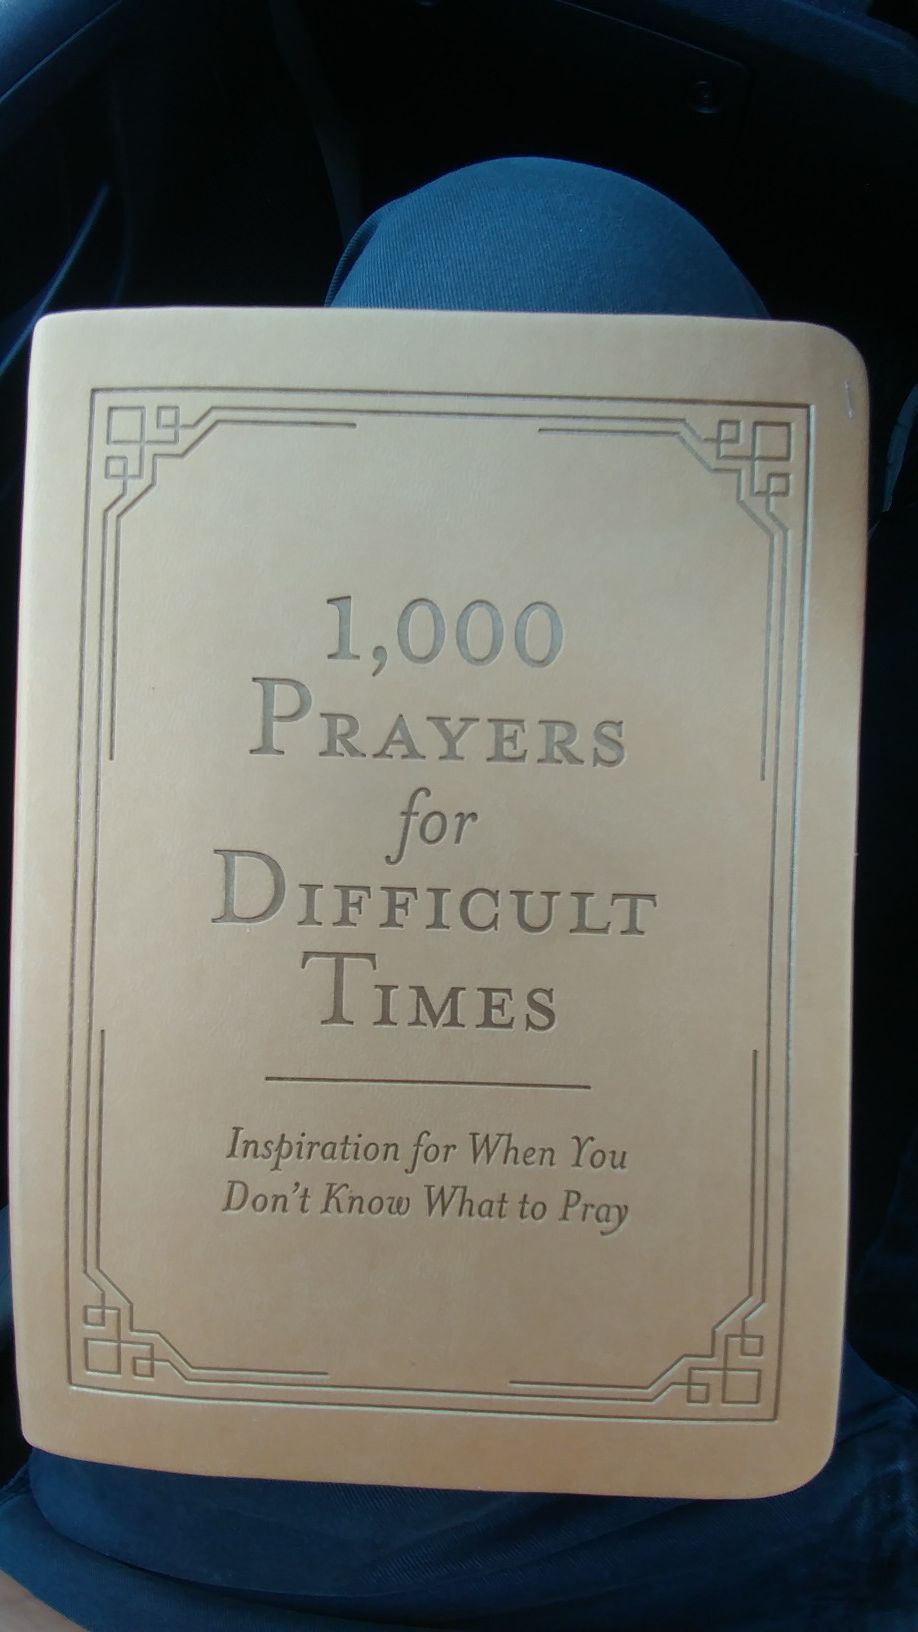 1,000 prayers for difficult times book...